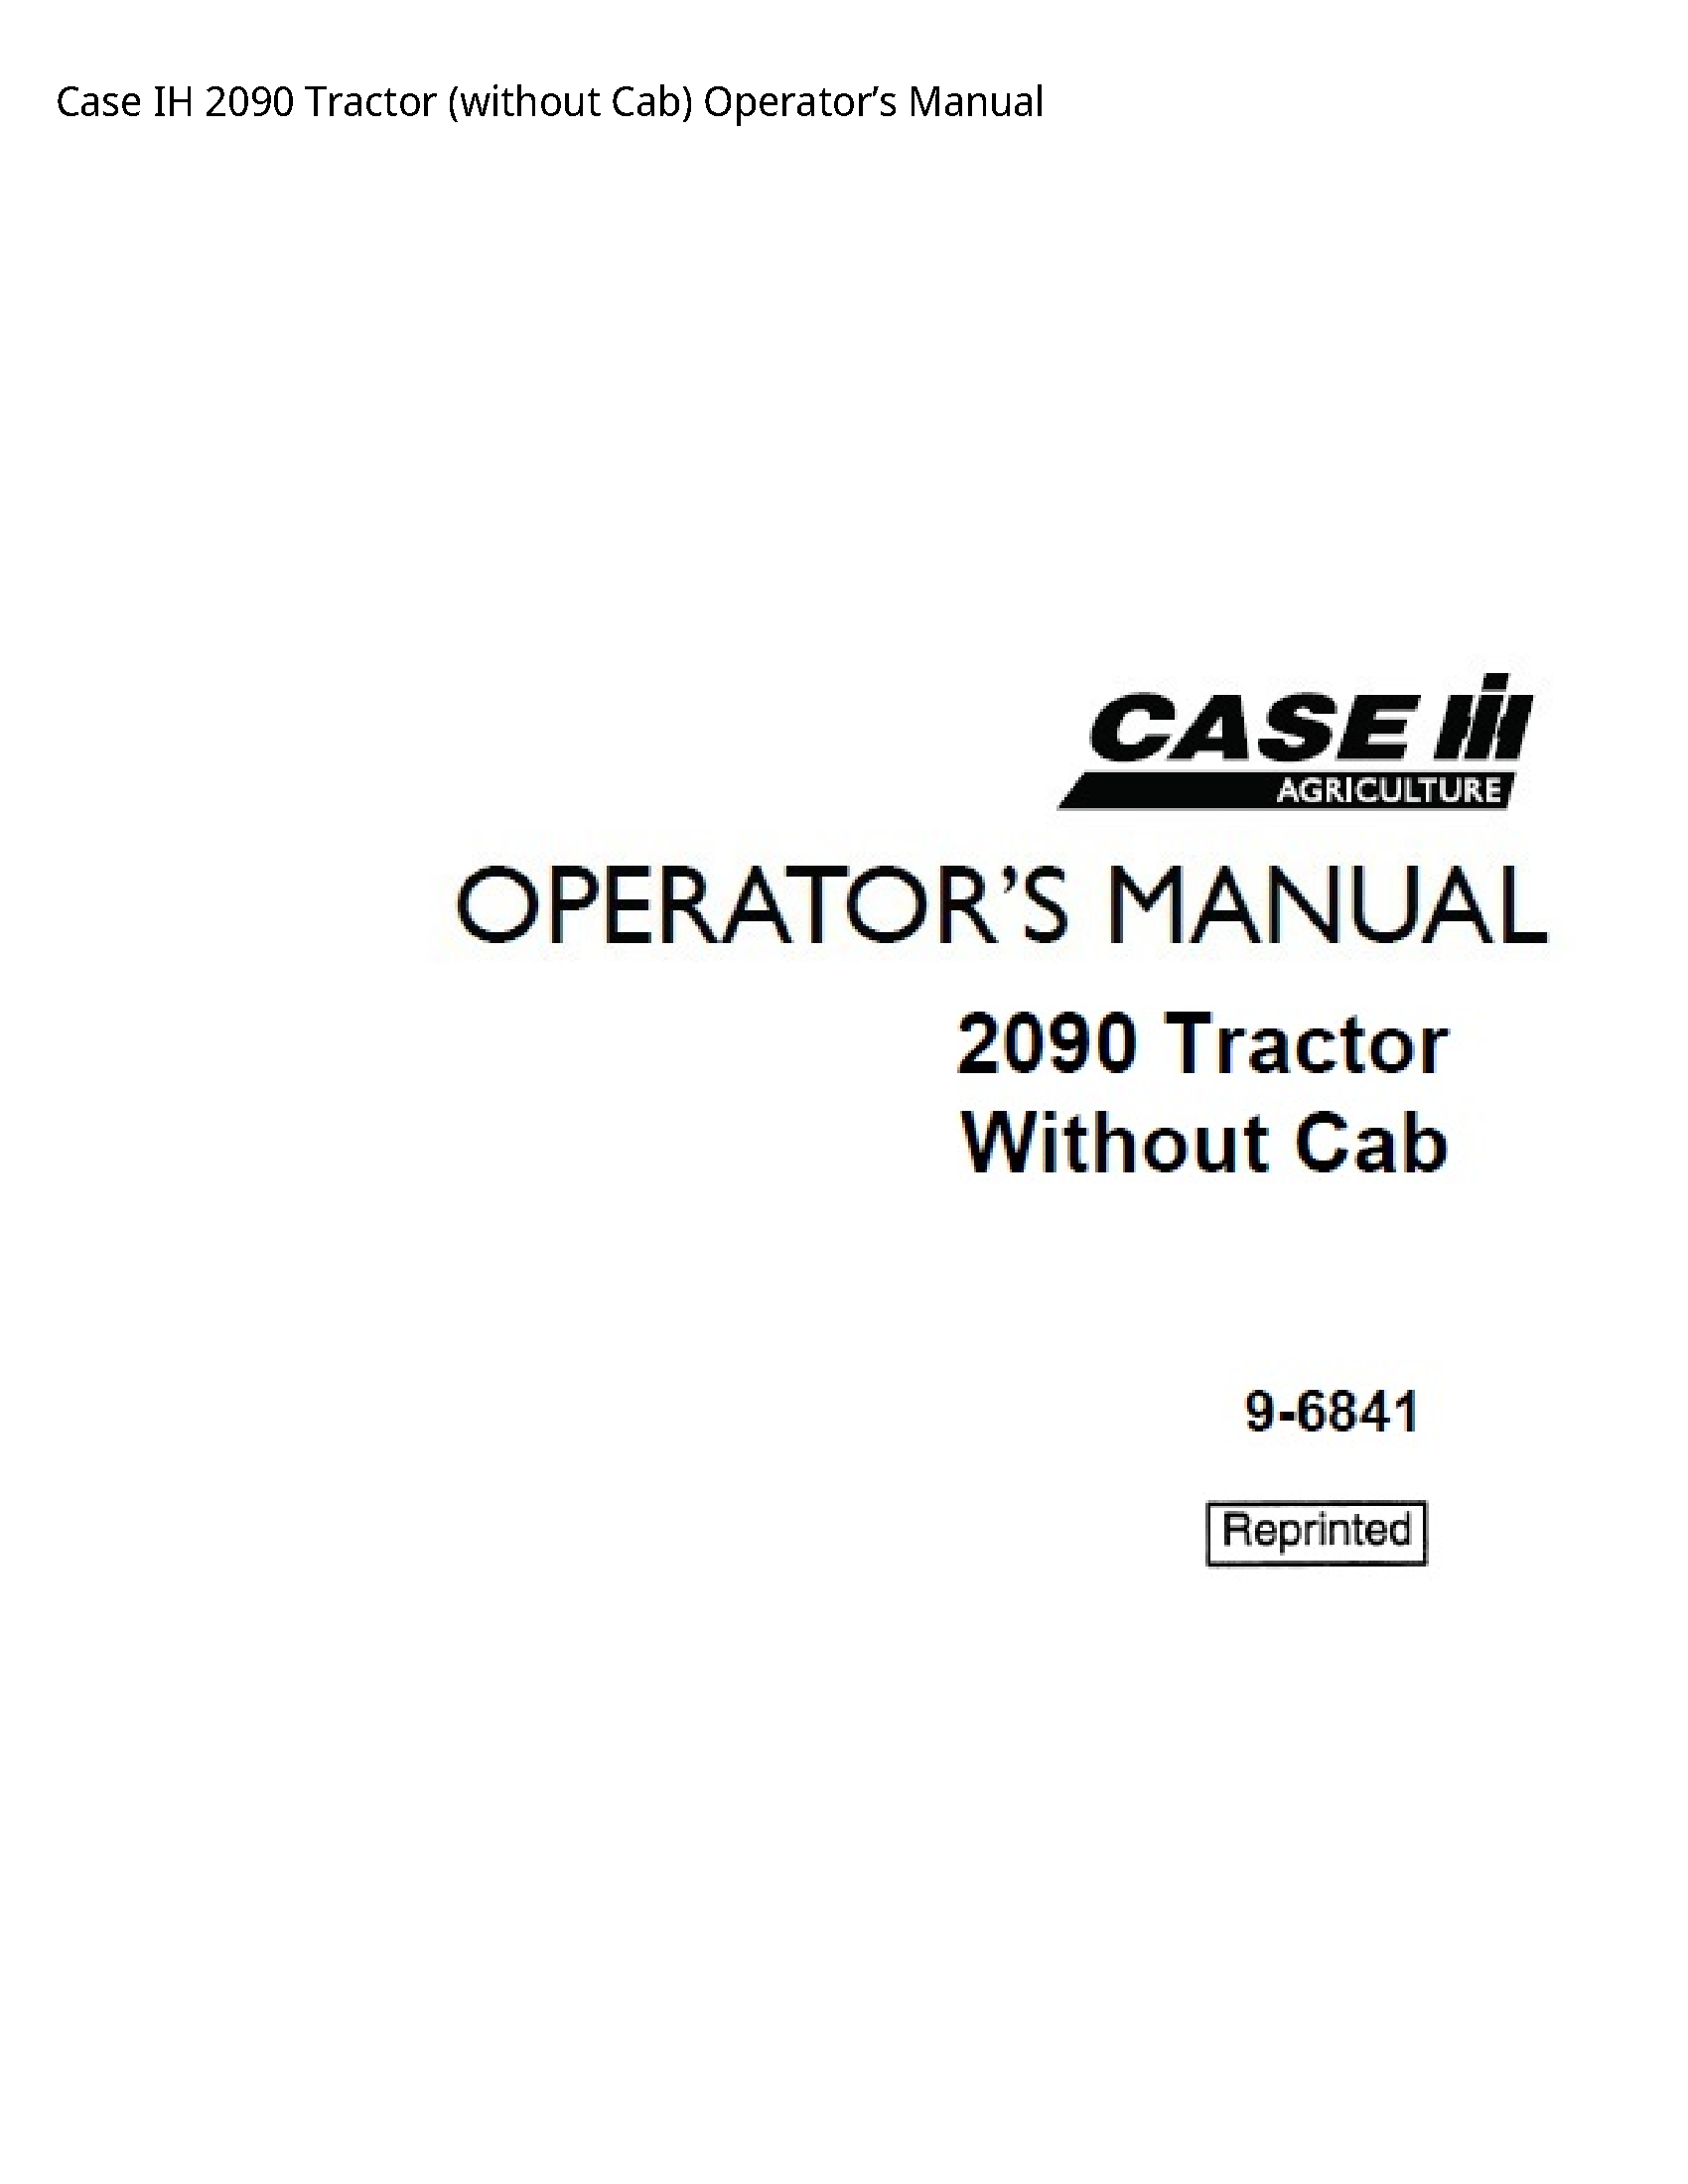 Case/Case IH 2090 IH Tractor (without Cab) Operator’s manual